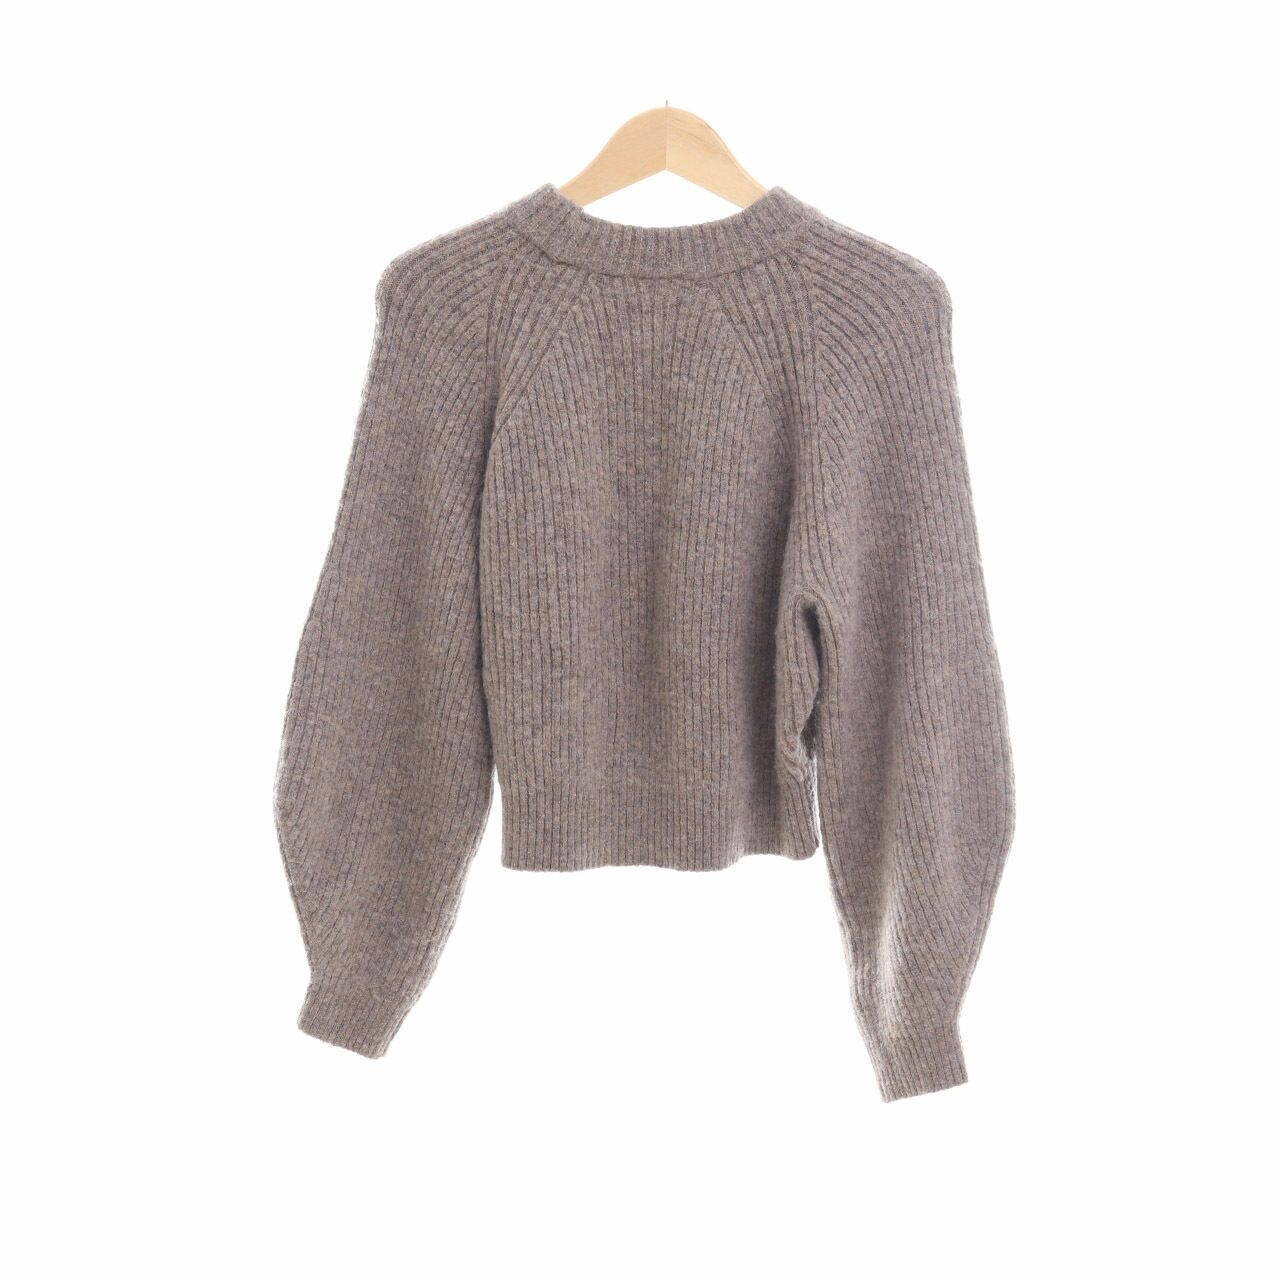 Weekday Taupe Crop Knit Sweater